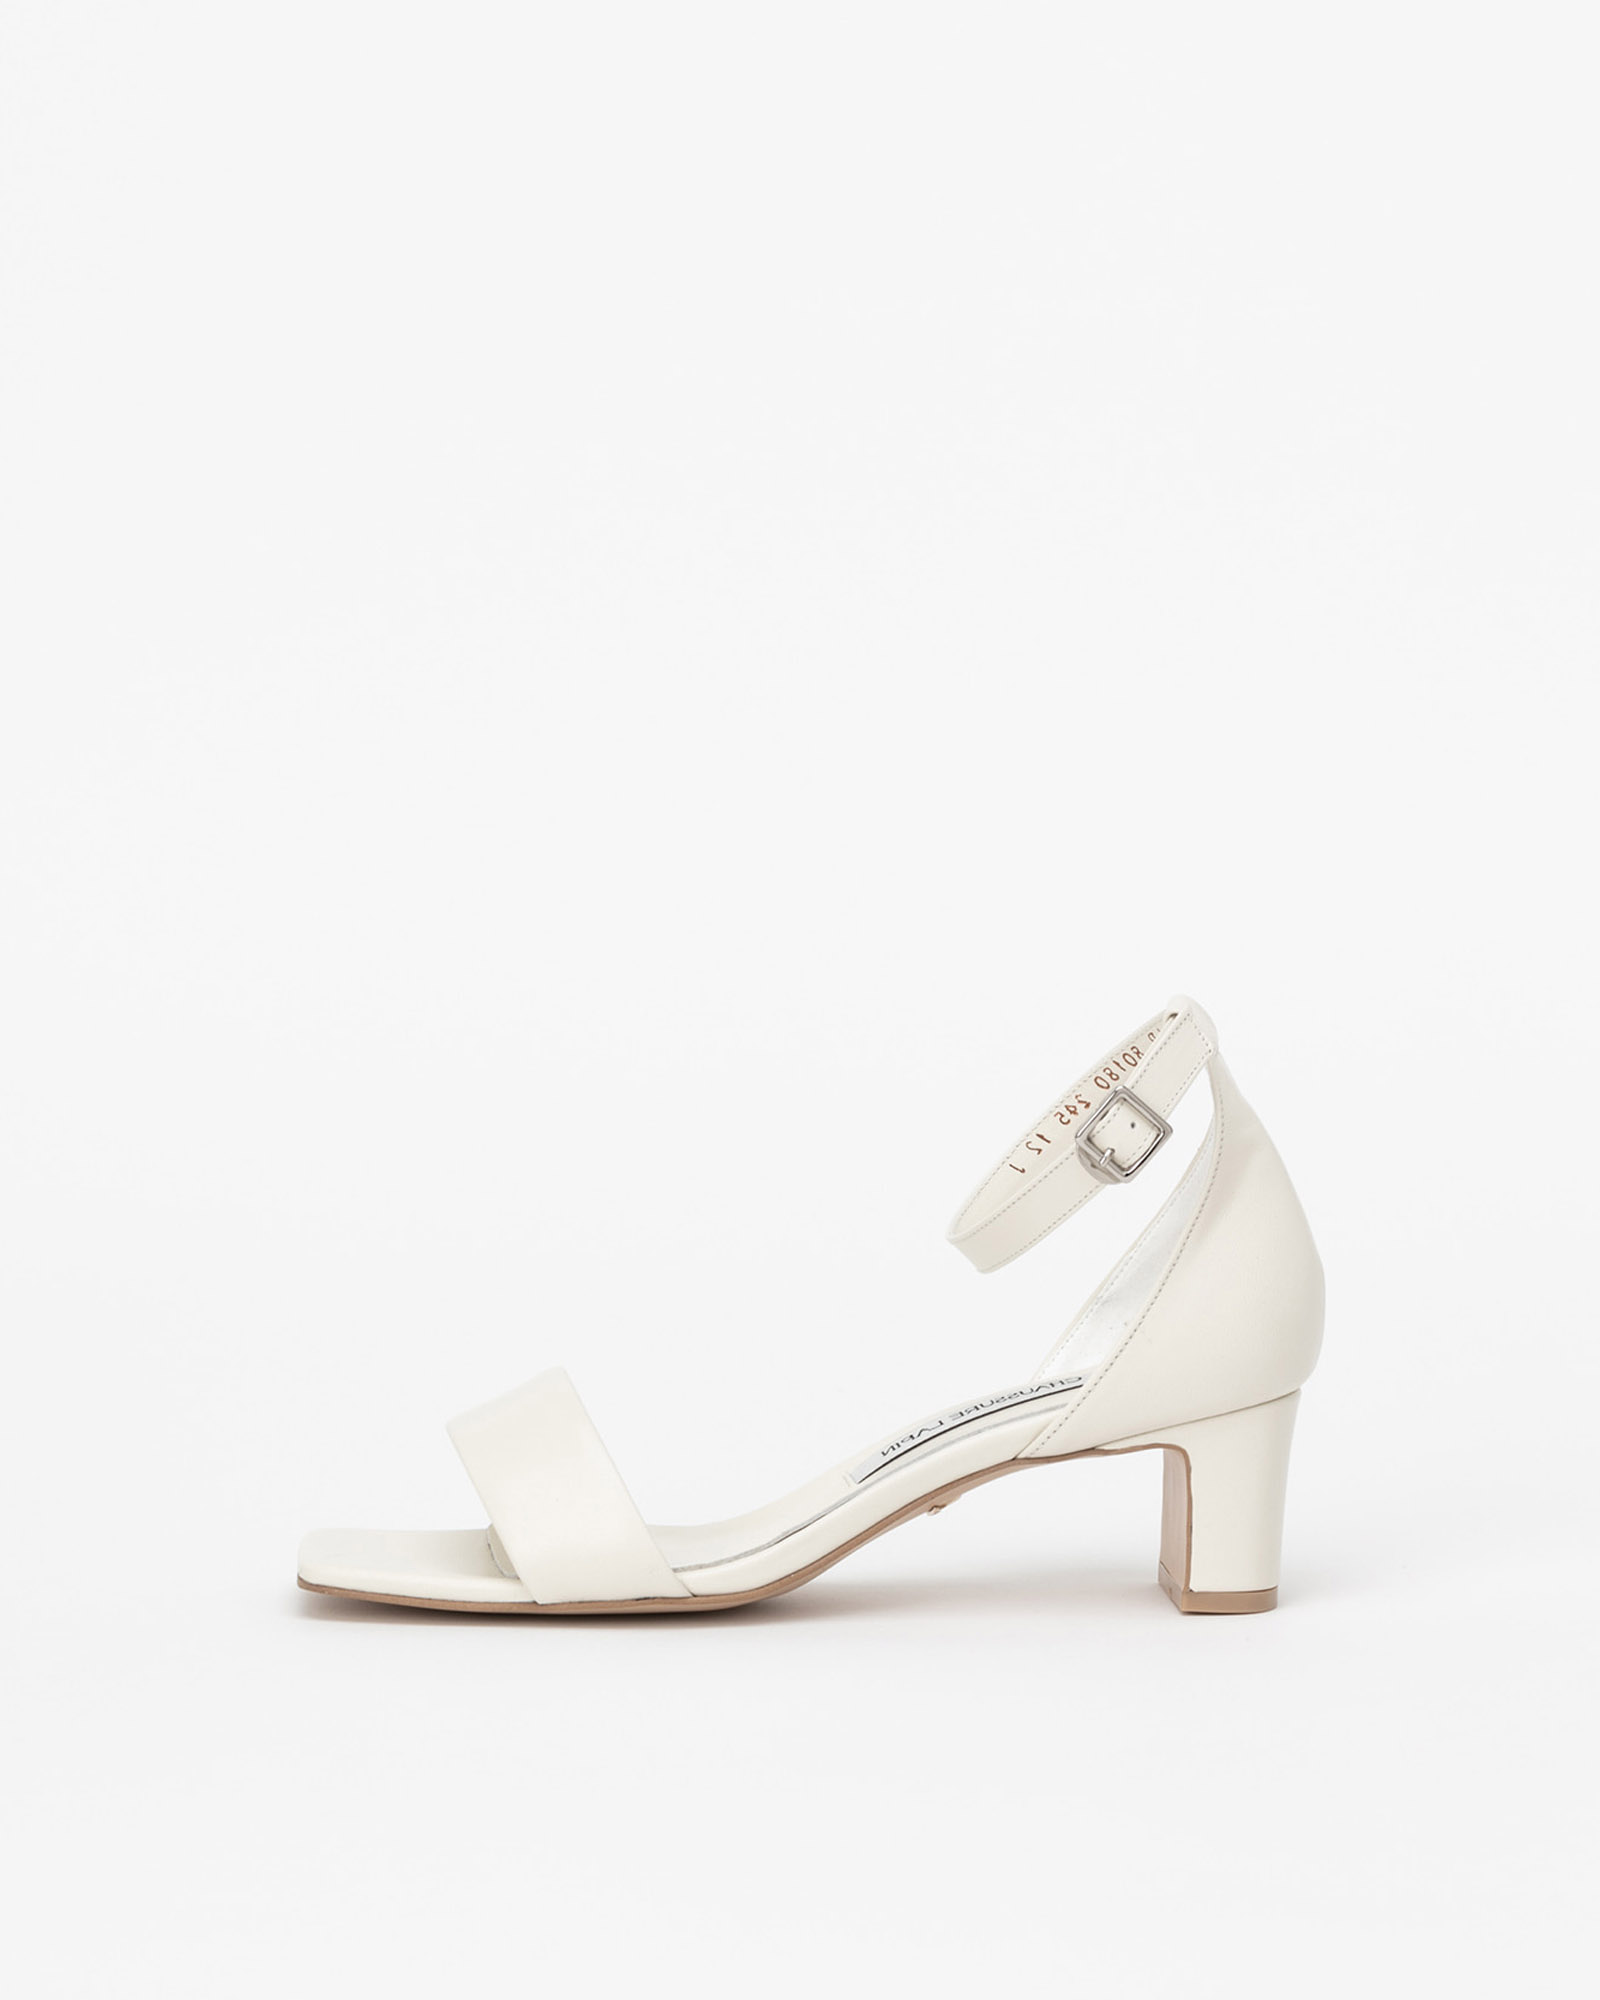 Vacancy Sandals in Ivory